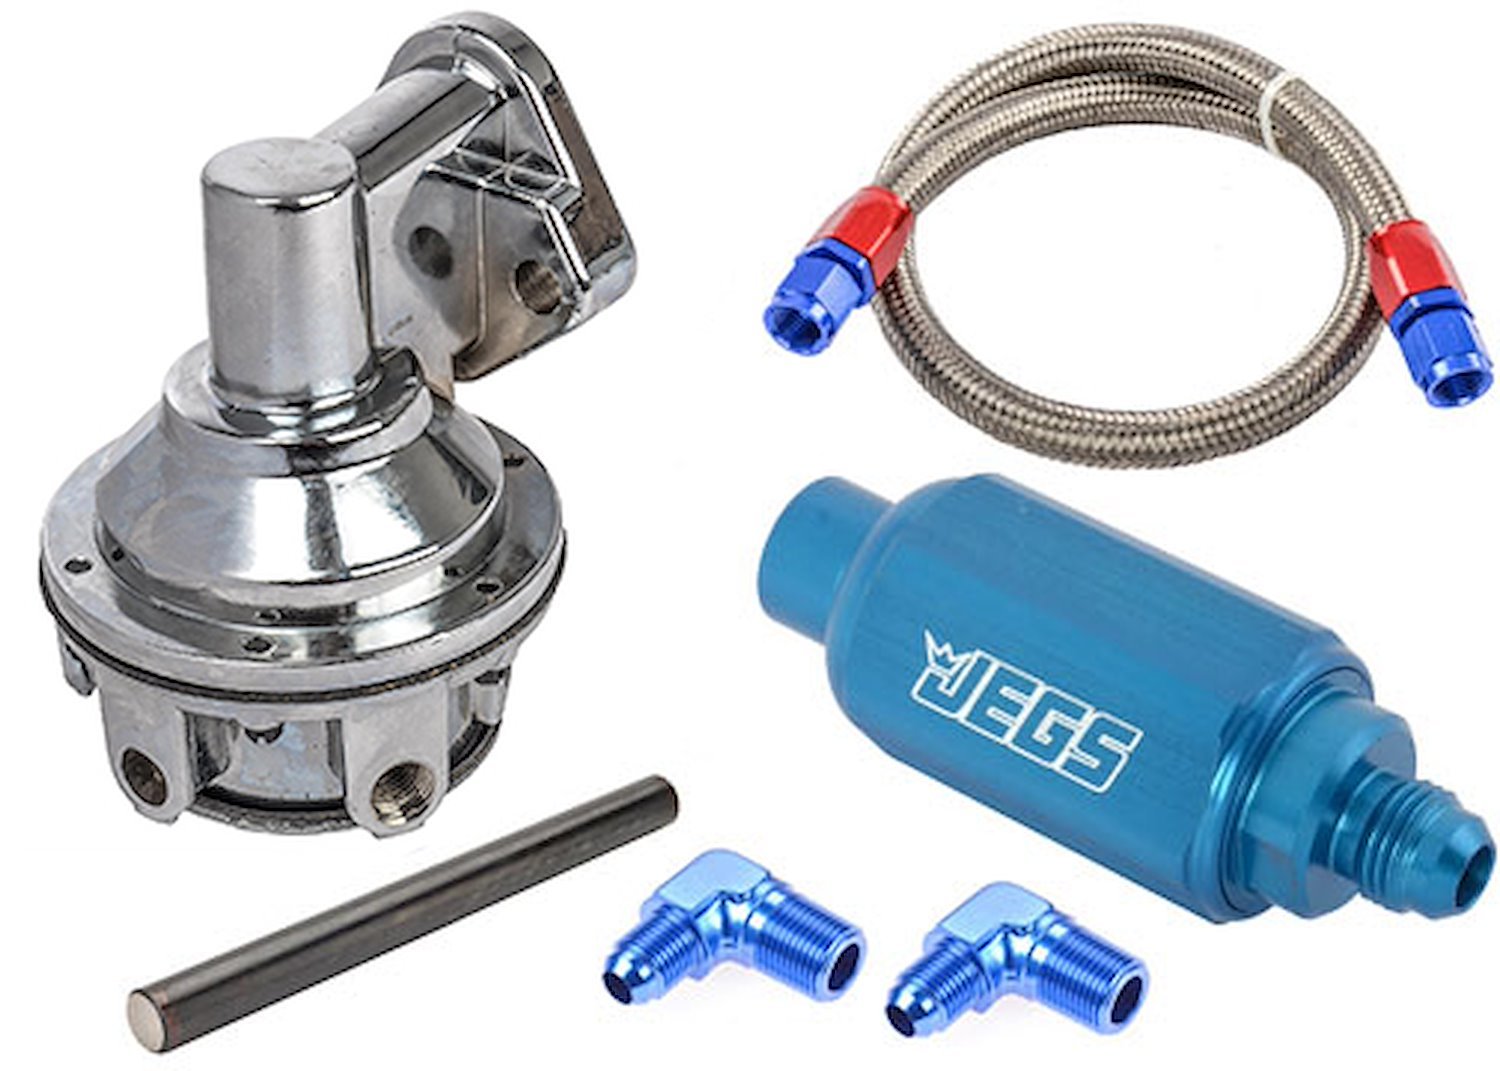 Mechanical Fuel Pump & Installation Kit for Small Block Chevy 265-283-327-350-400 [110 gph, Blue Fittings]